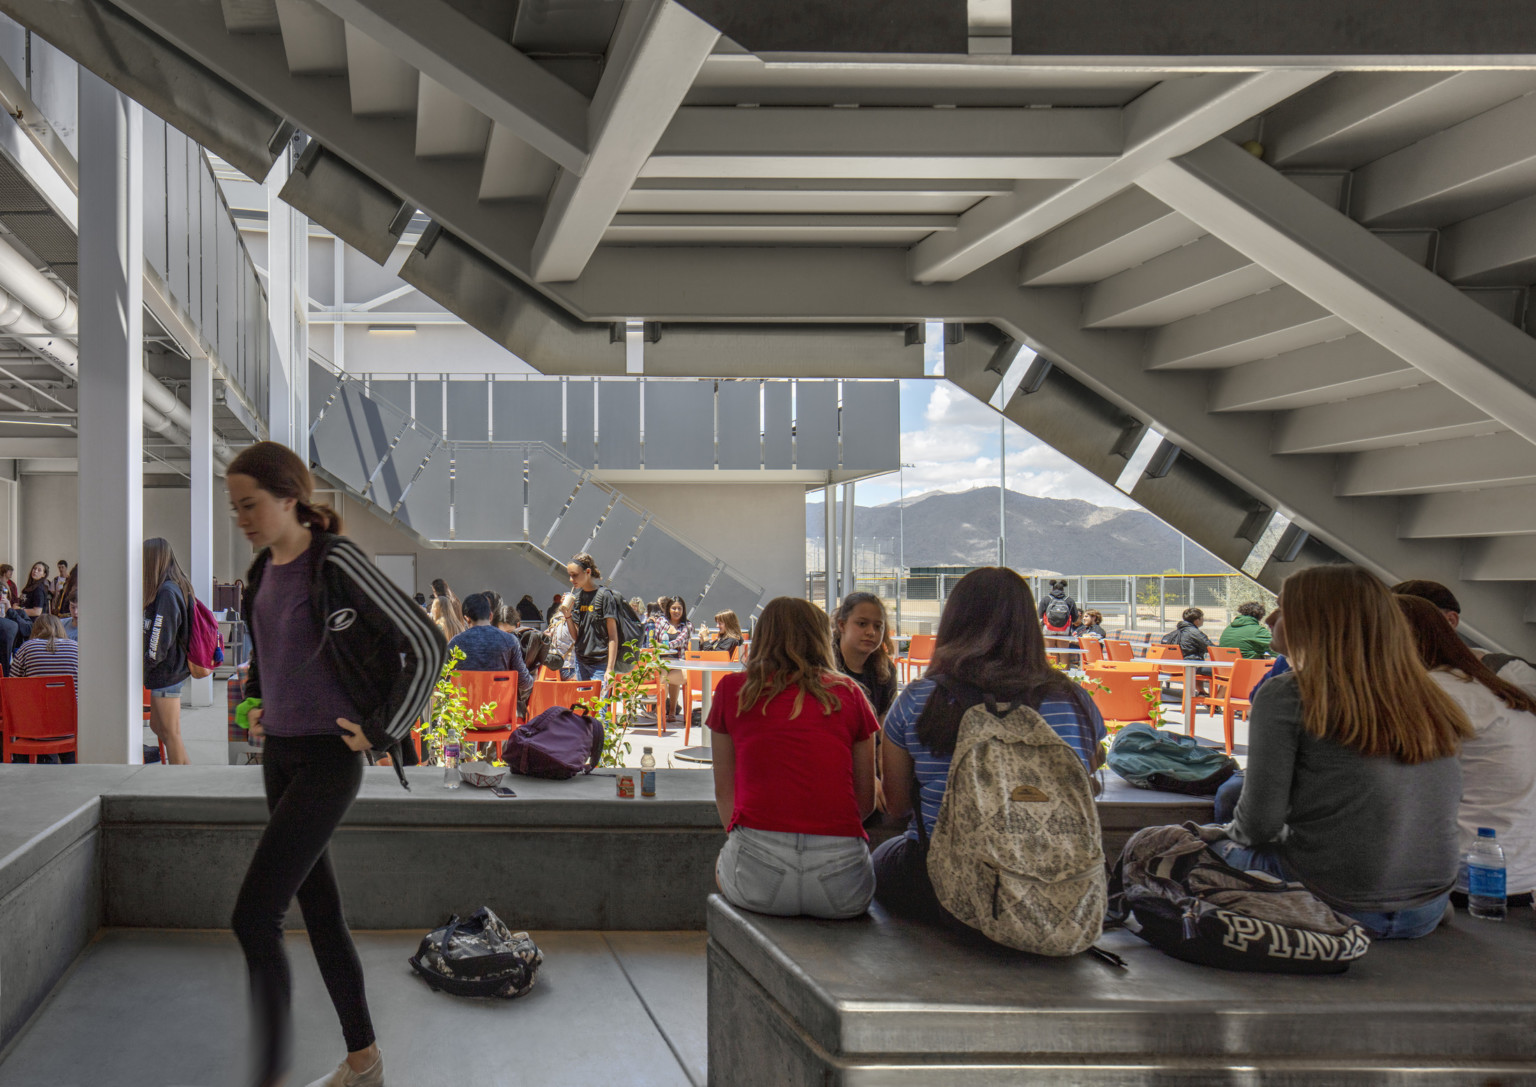 view of students in a covered, multiple story outdoor seating area beneath communicating stairs at canyon view high school